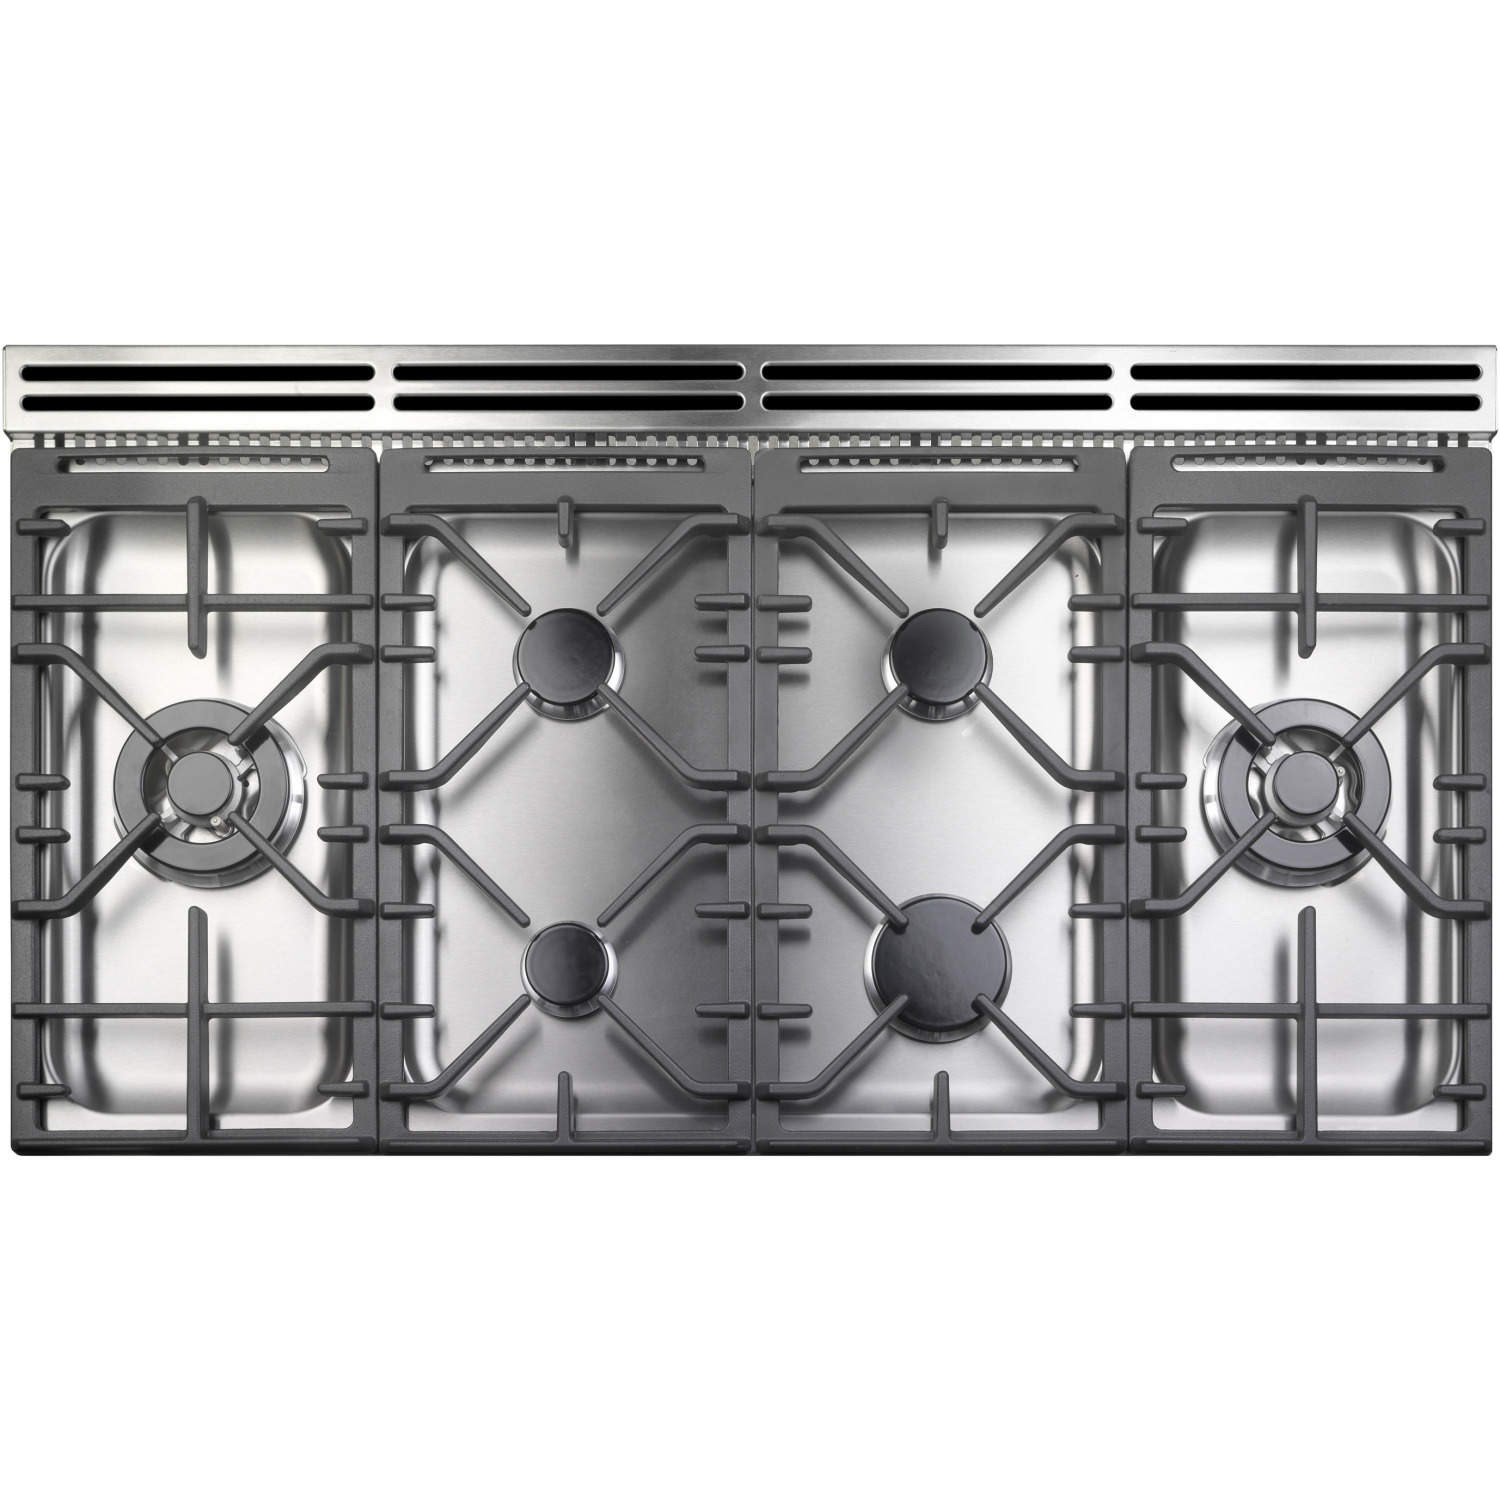 Gas Hob Features